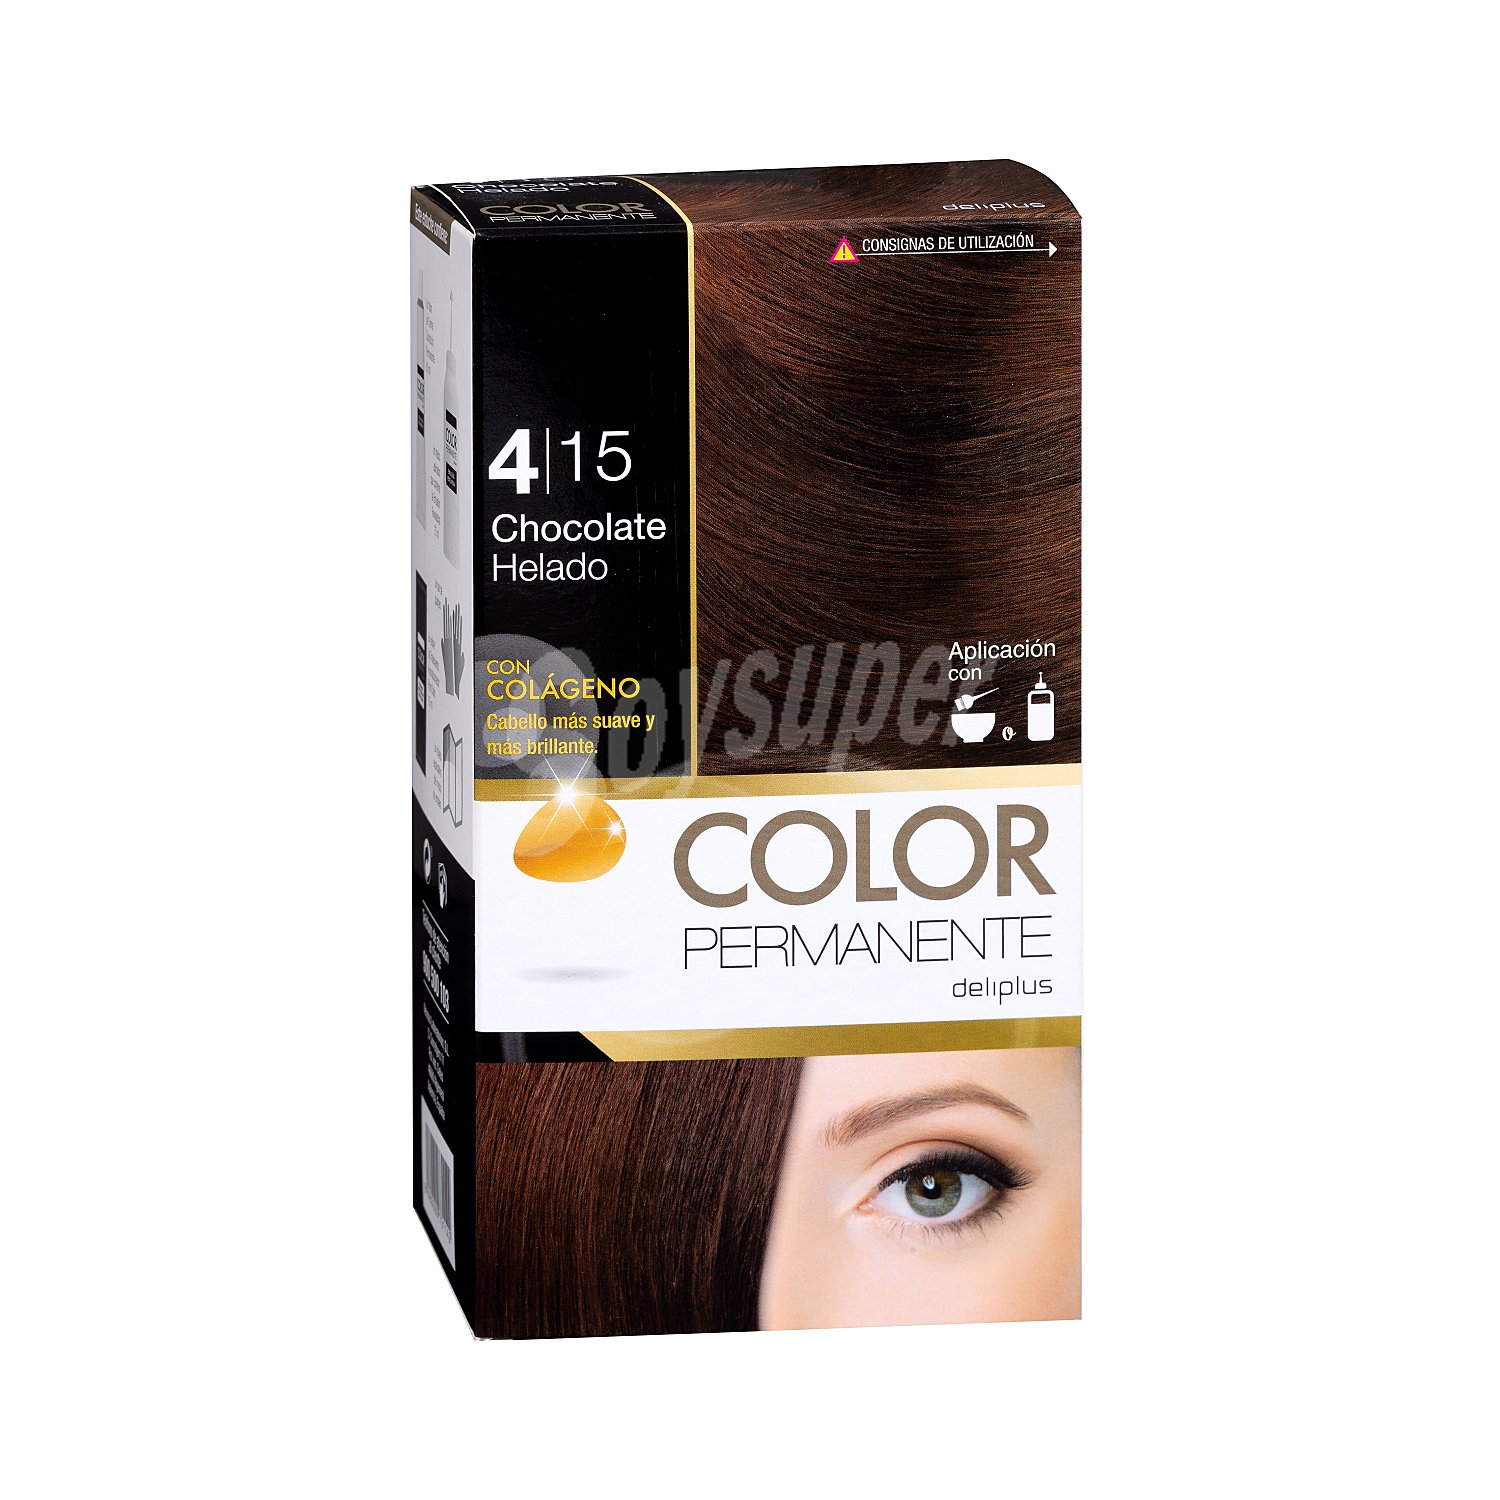 DELIPLUS Color Permanente N ,Iced chocolate - cosmetics from Spain